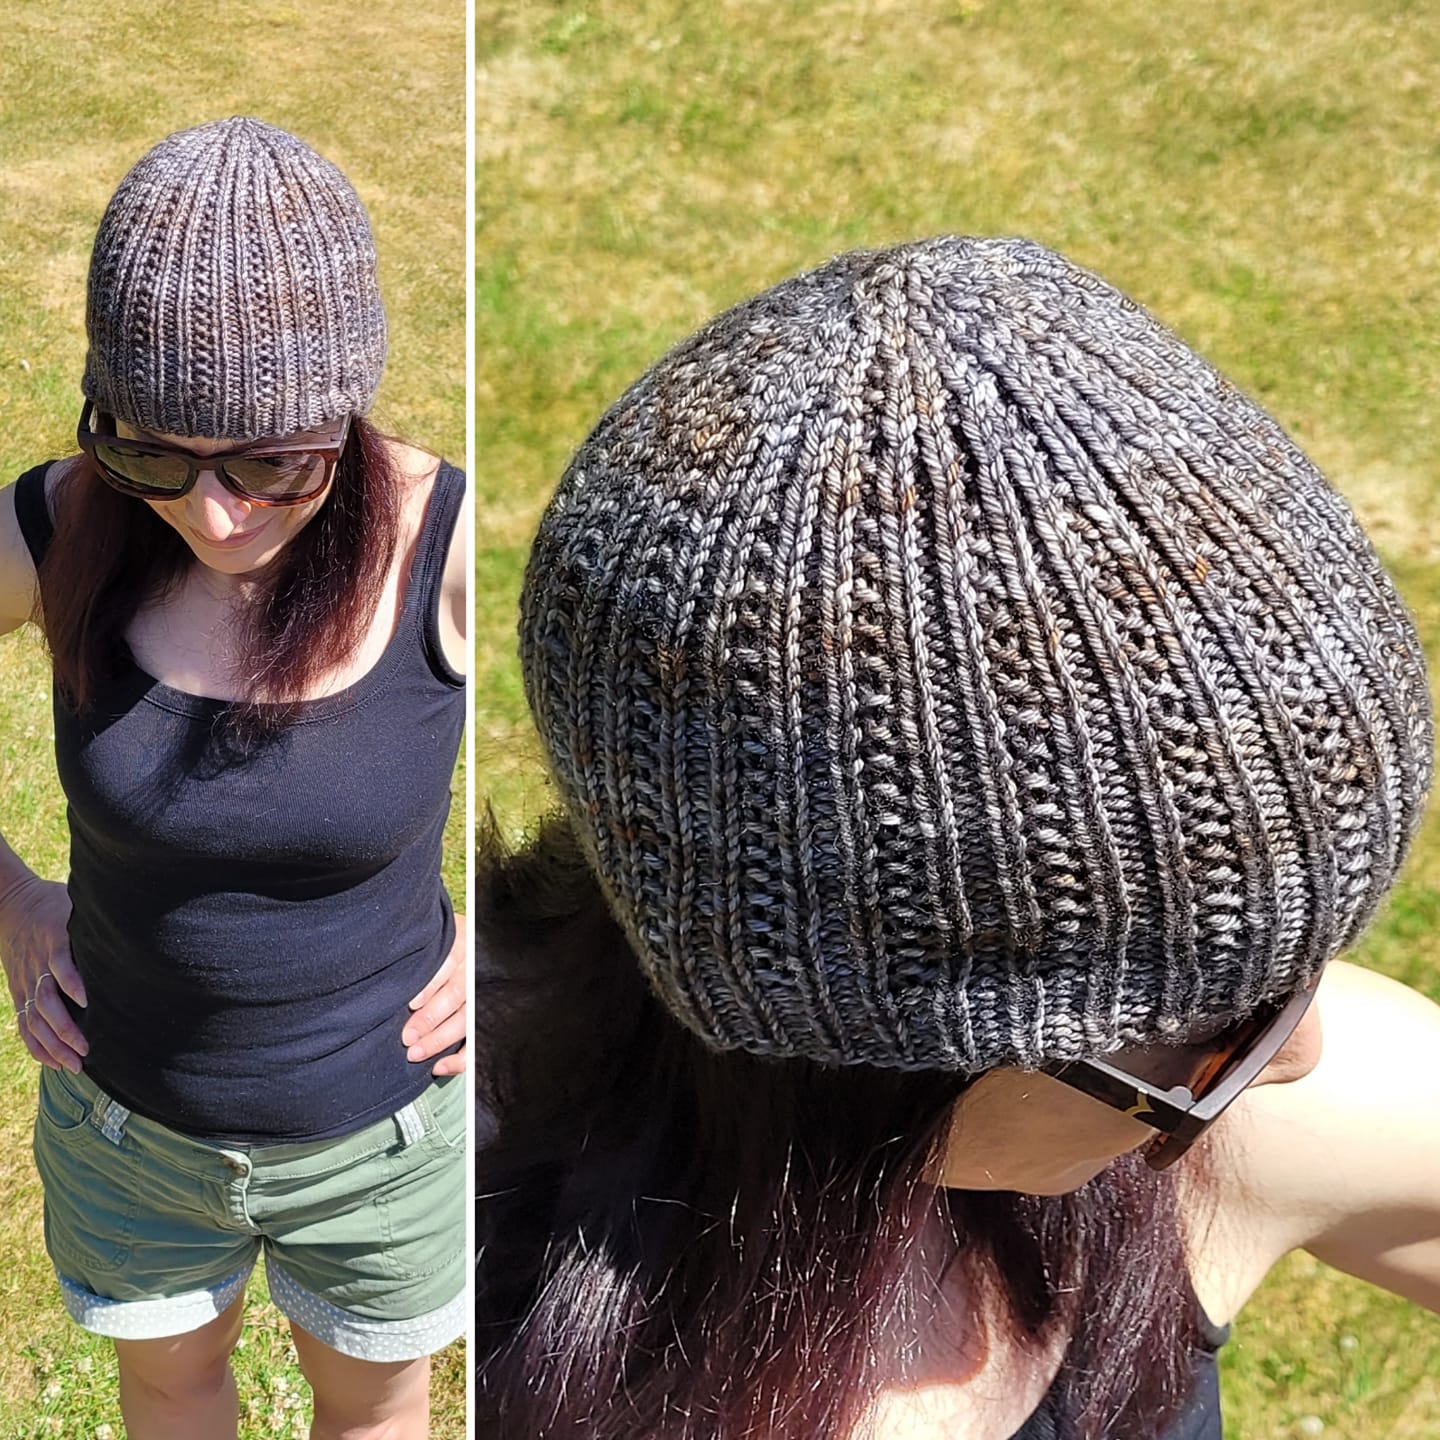 Collage image showing a full length image of Dawn wearing a vest top, denim shorts and a knitted grey and brown hat on the left. On the right is a close up of the knitted hat in grey with brown washes.